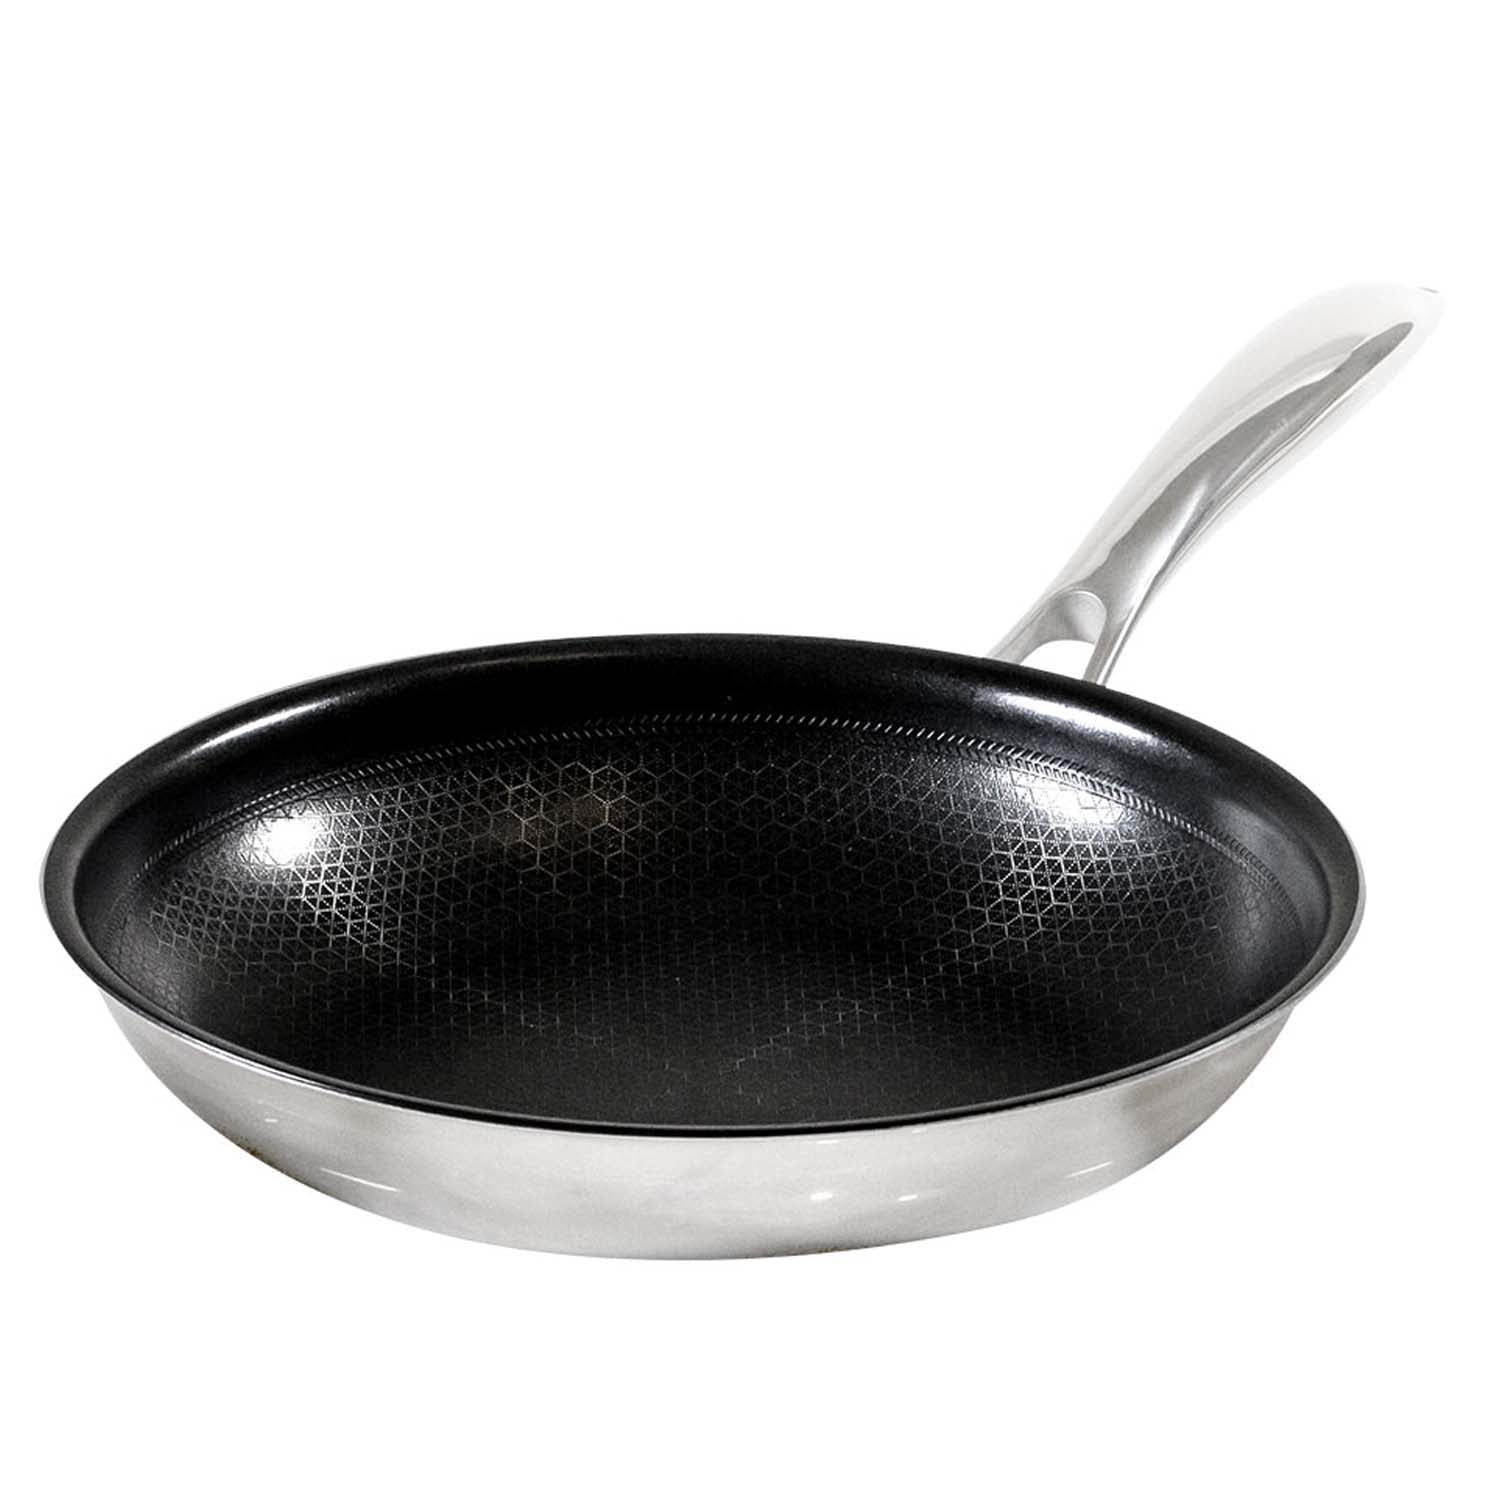 Frieling 9.5 inch Black Cube Saute Pan with Lid